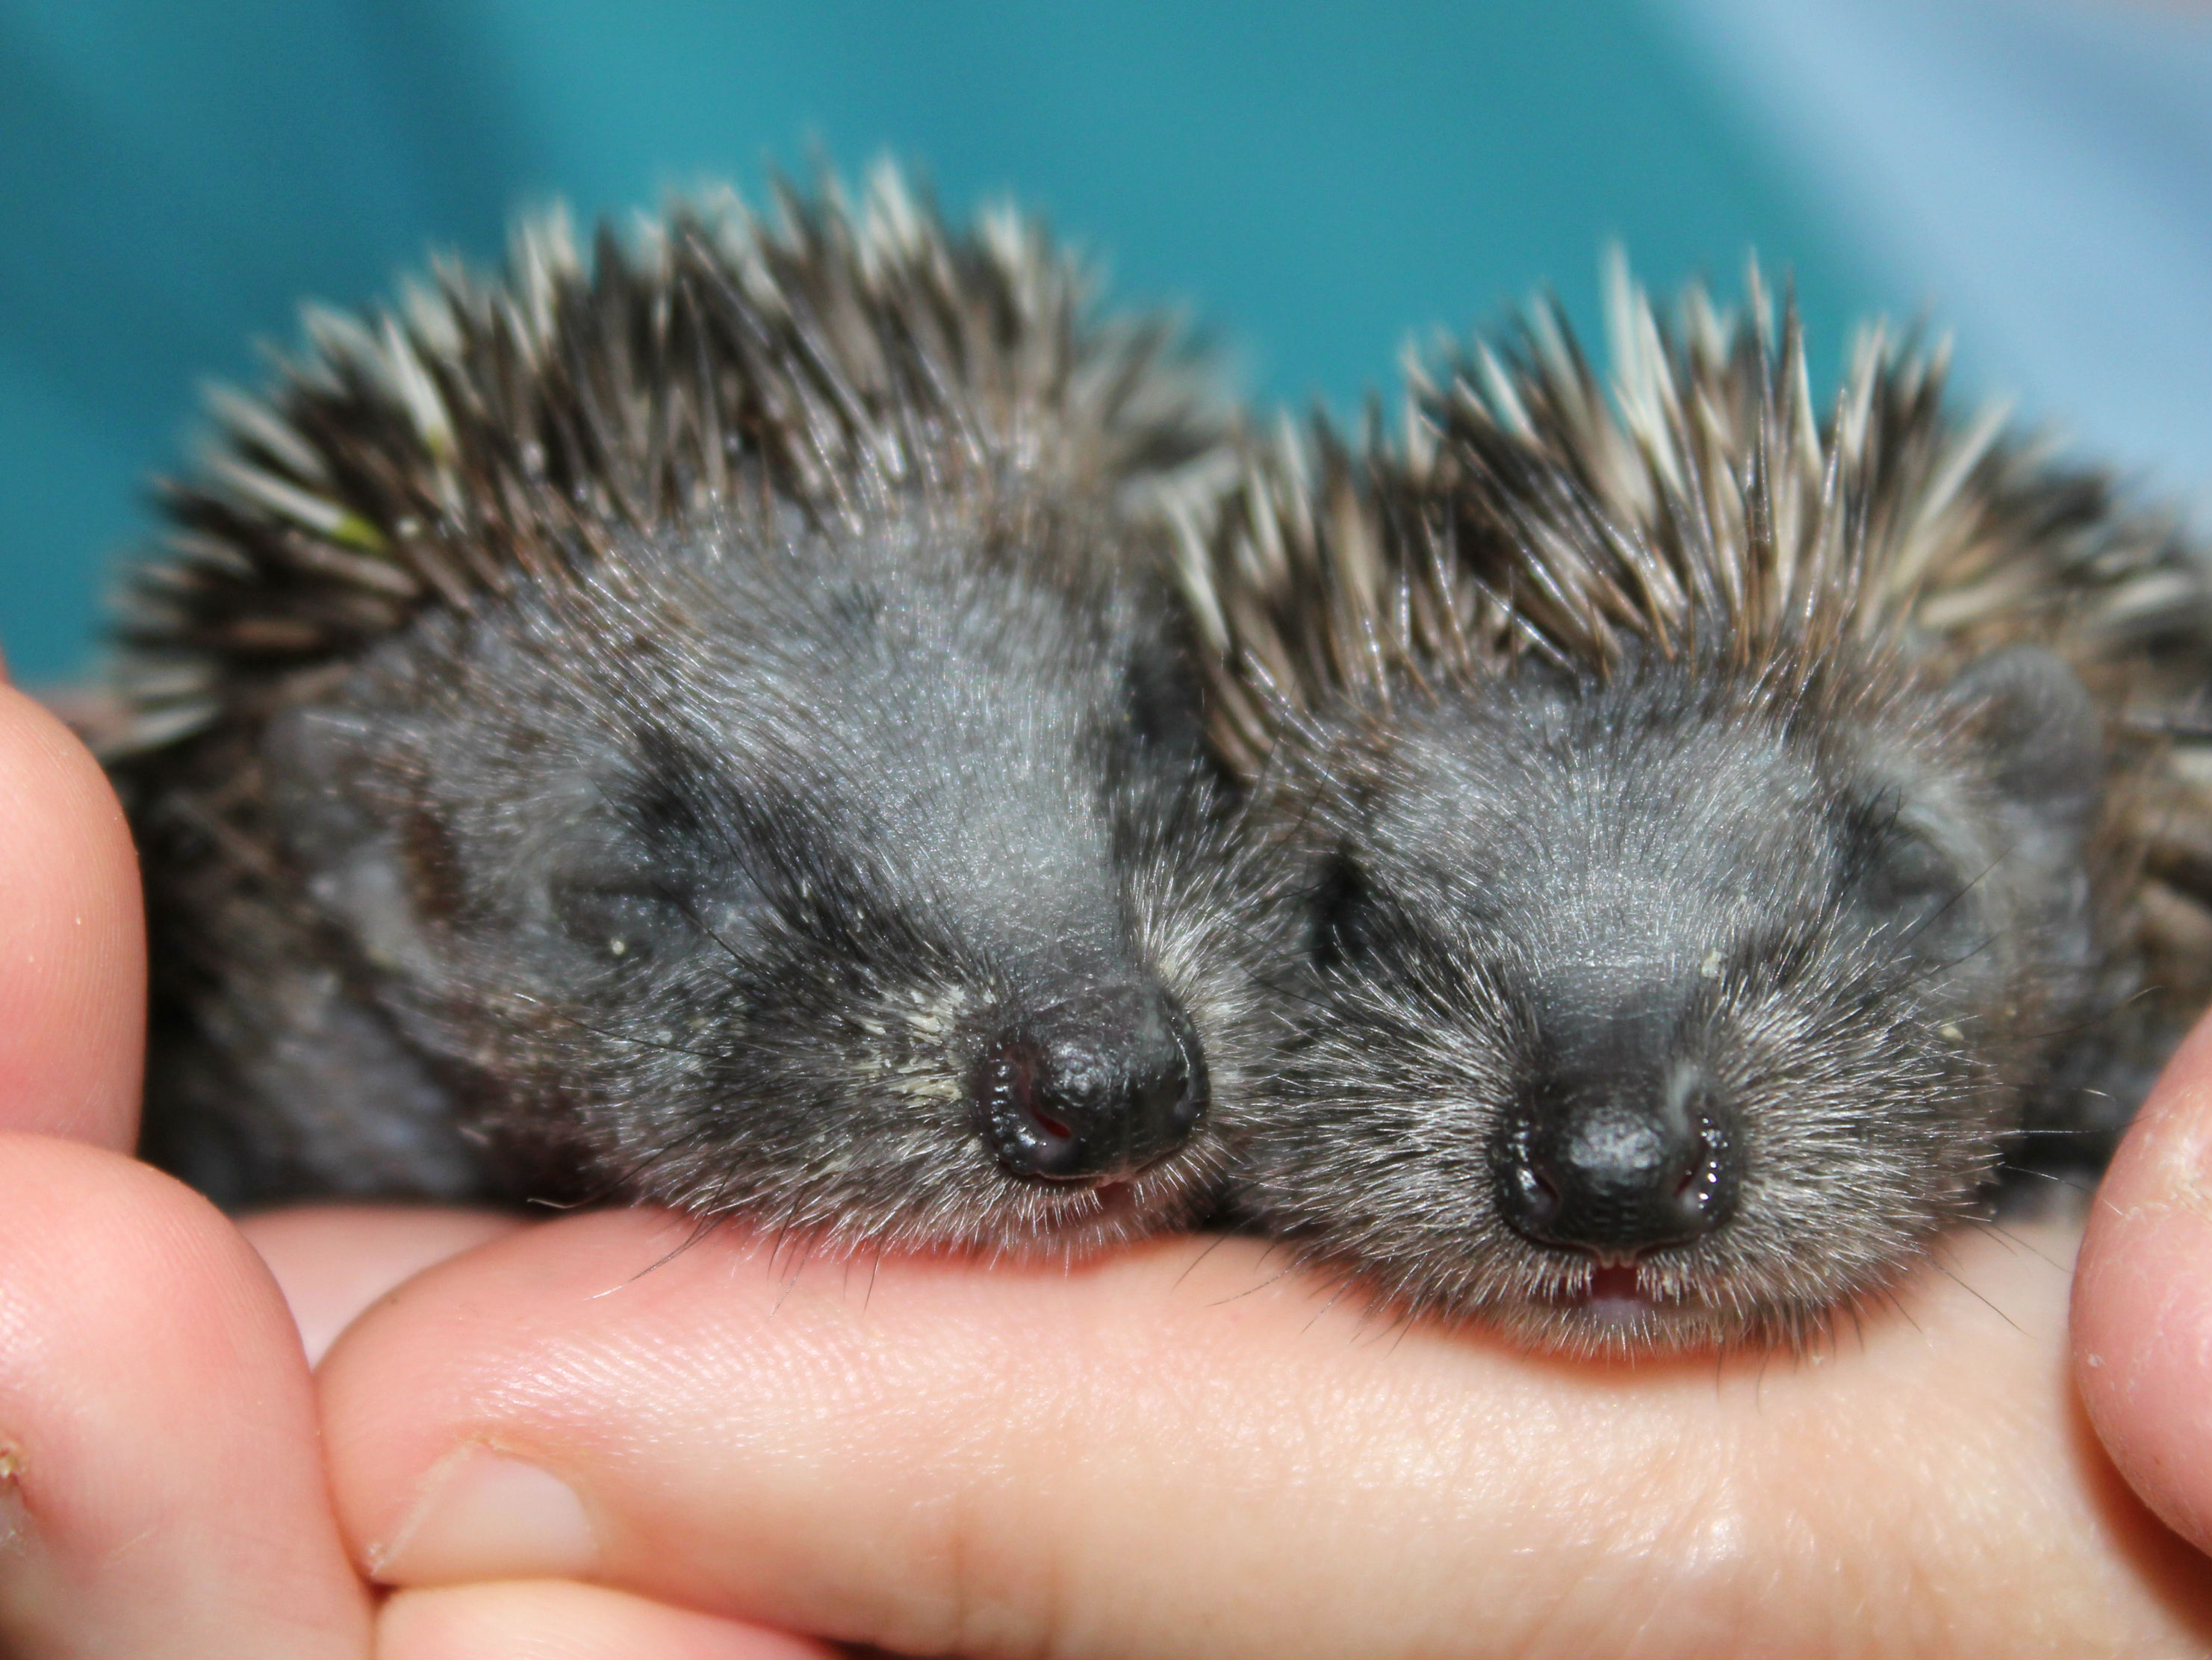 Pair of baby hoglets by Little Silver Hedgehog